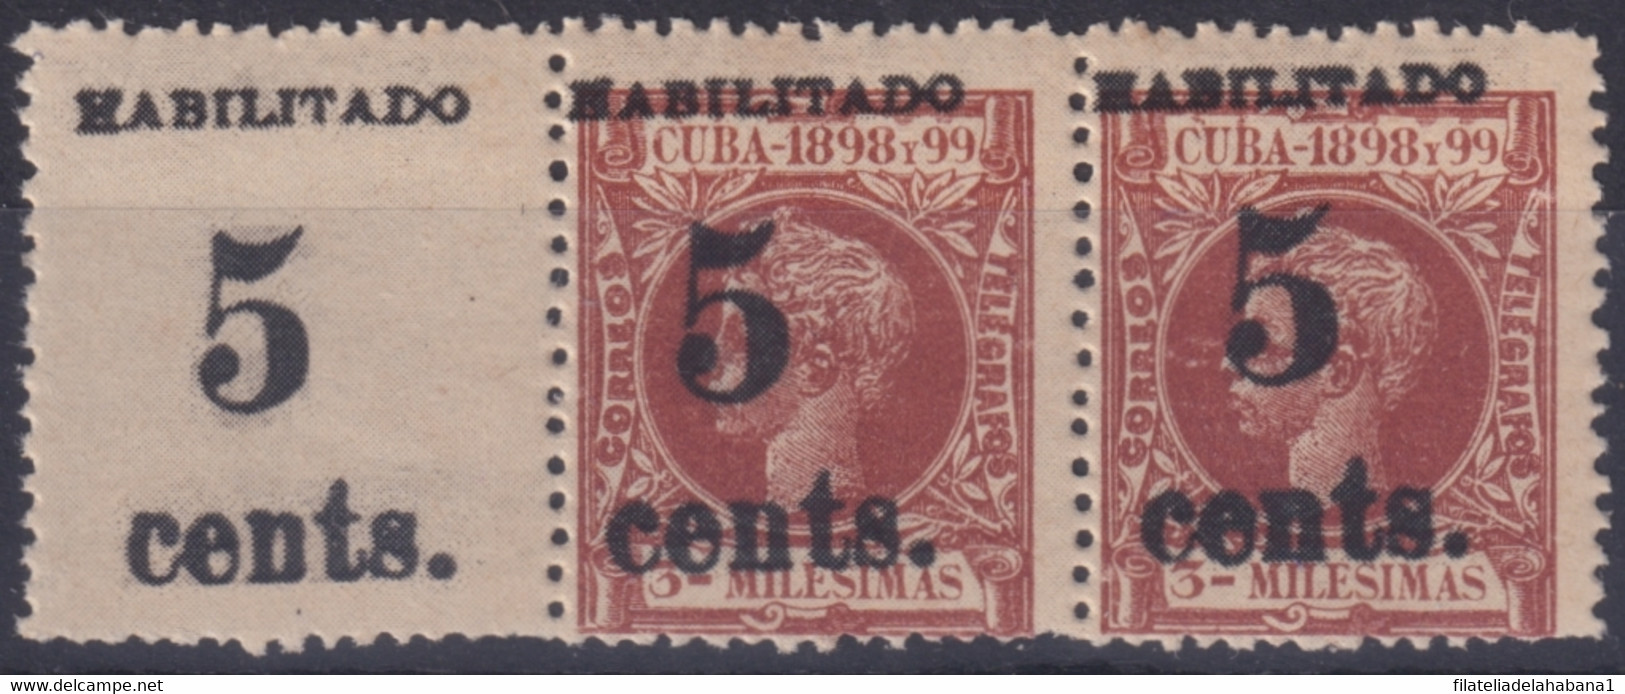 1899-494 CUBA 1899 5c S. 3c US OCCUPATION 2th ISSUE FINE NUMBER PHILATELIC FORGERY. - Ungebraucht